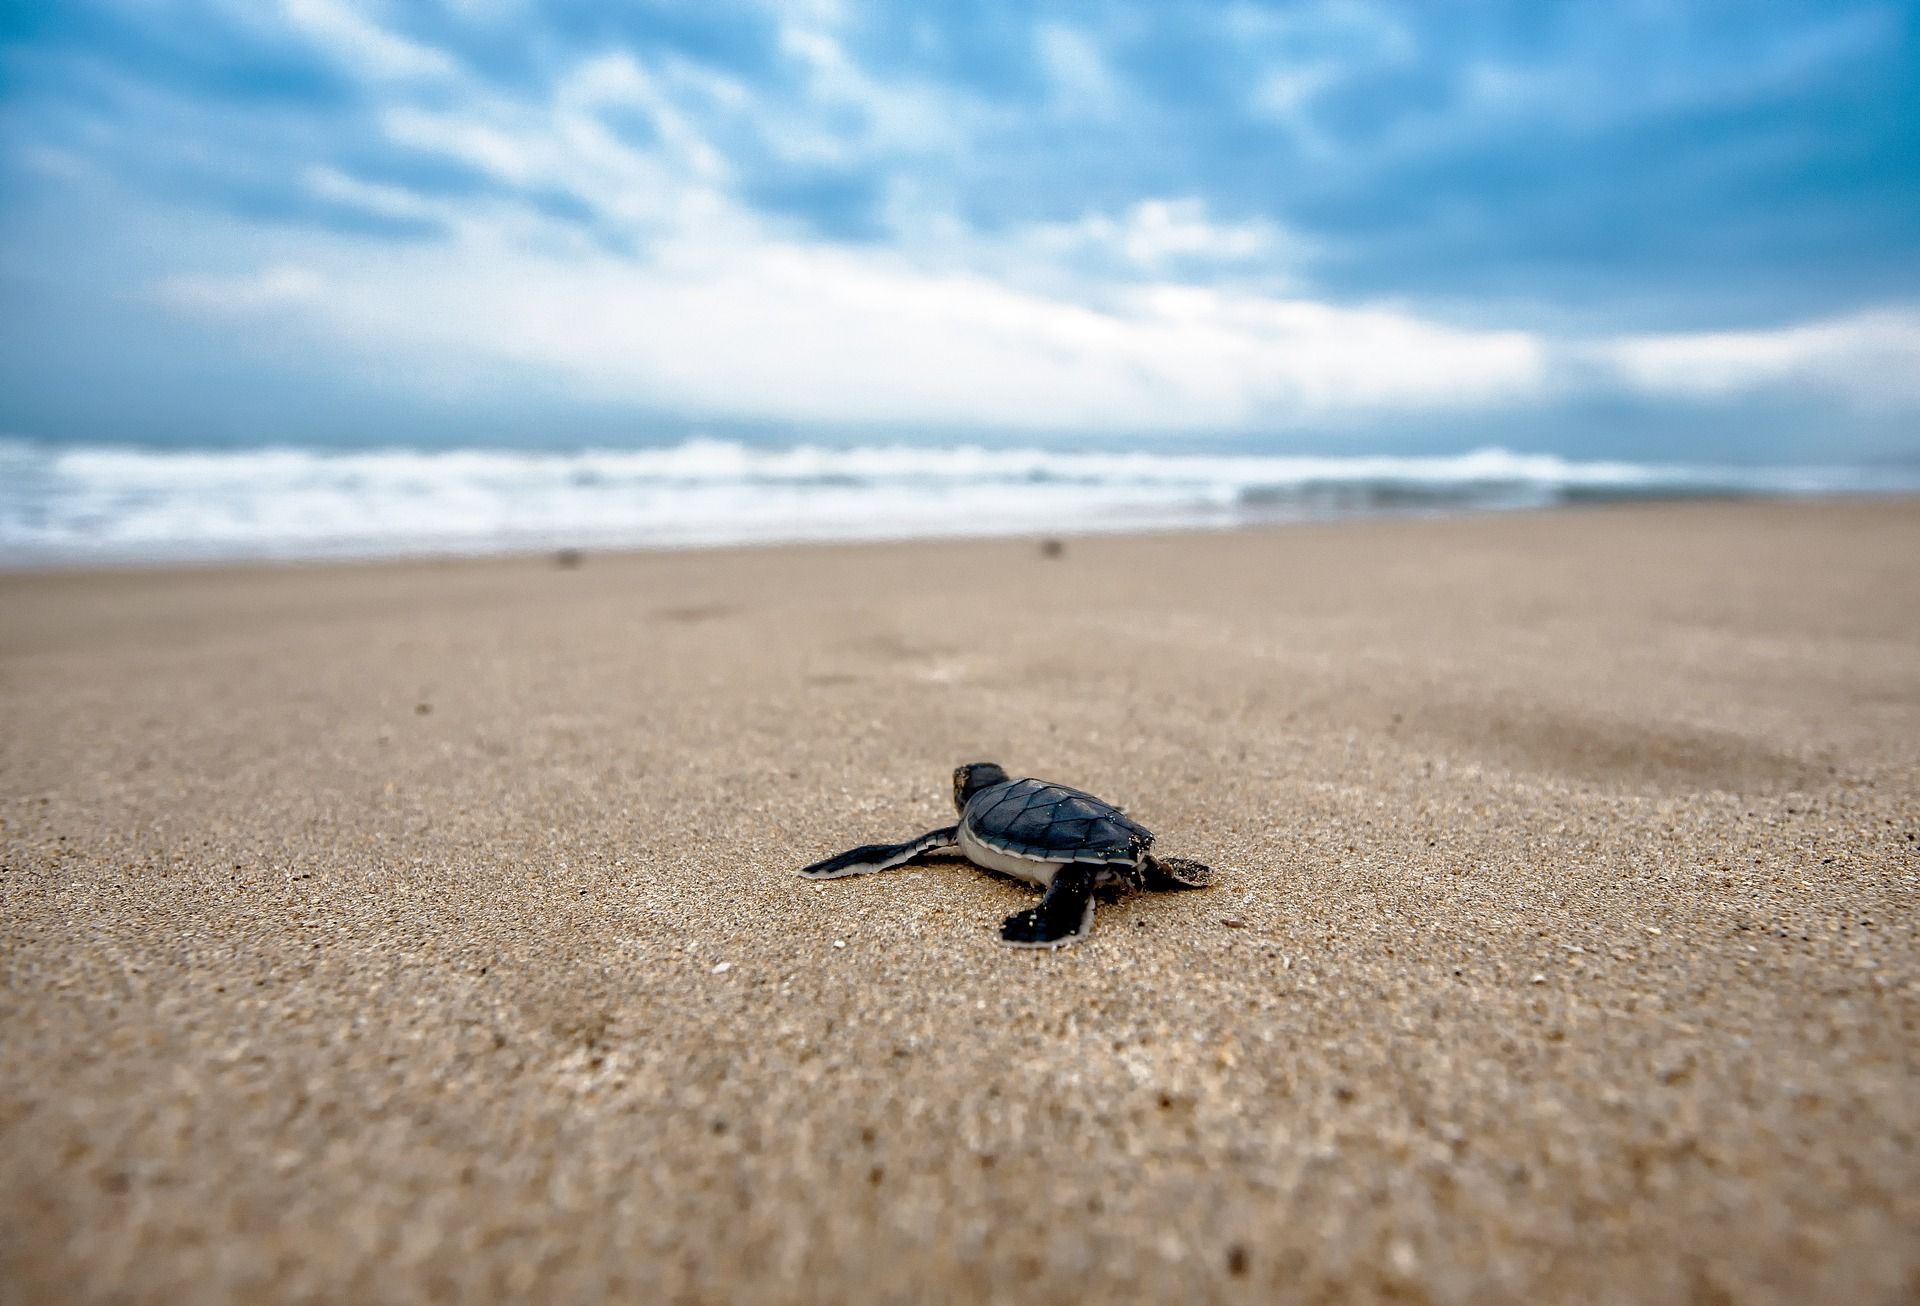 Release of baby turtles in Cabo San Lucas